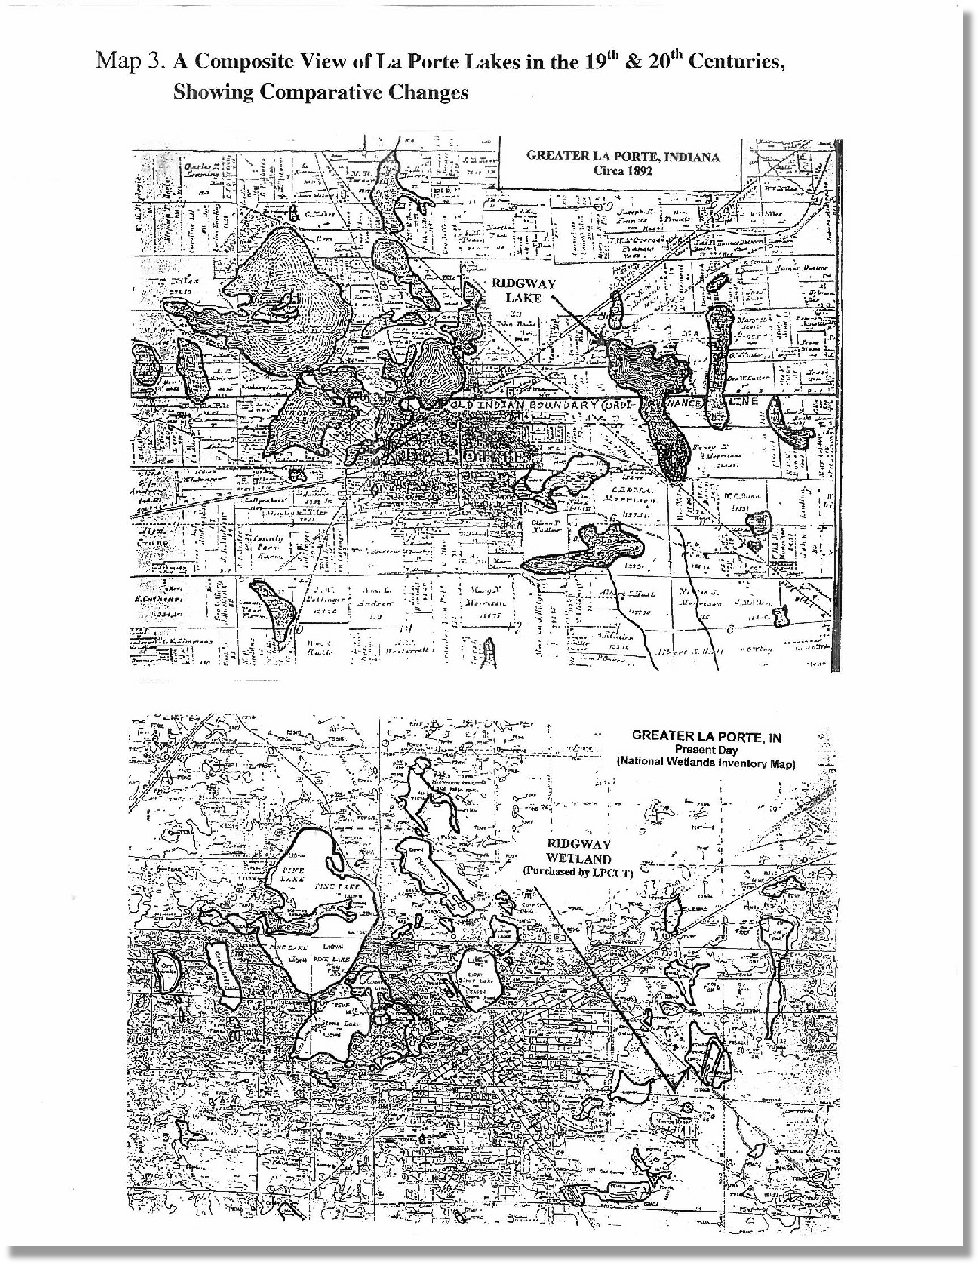 Comparitive Changes to La Porte Lakes - 19th to 20th Centuries